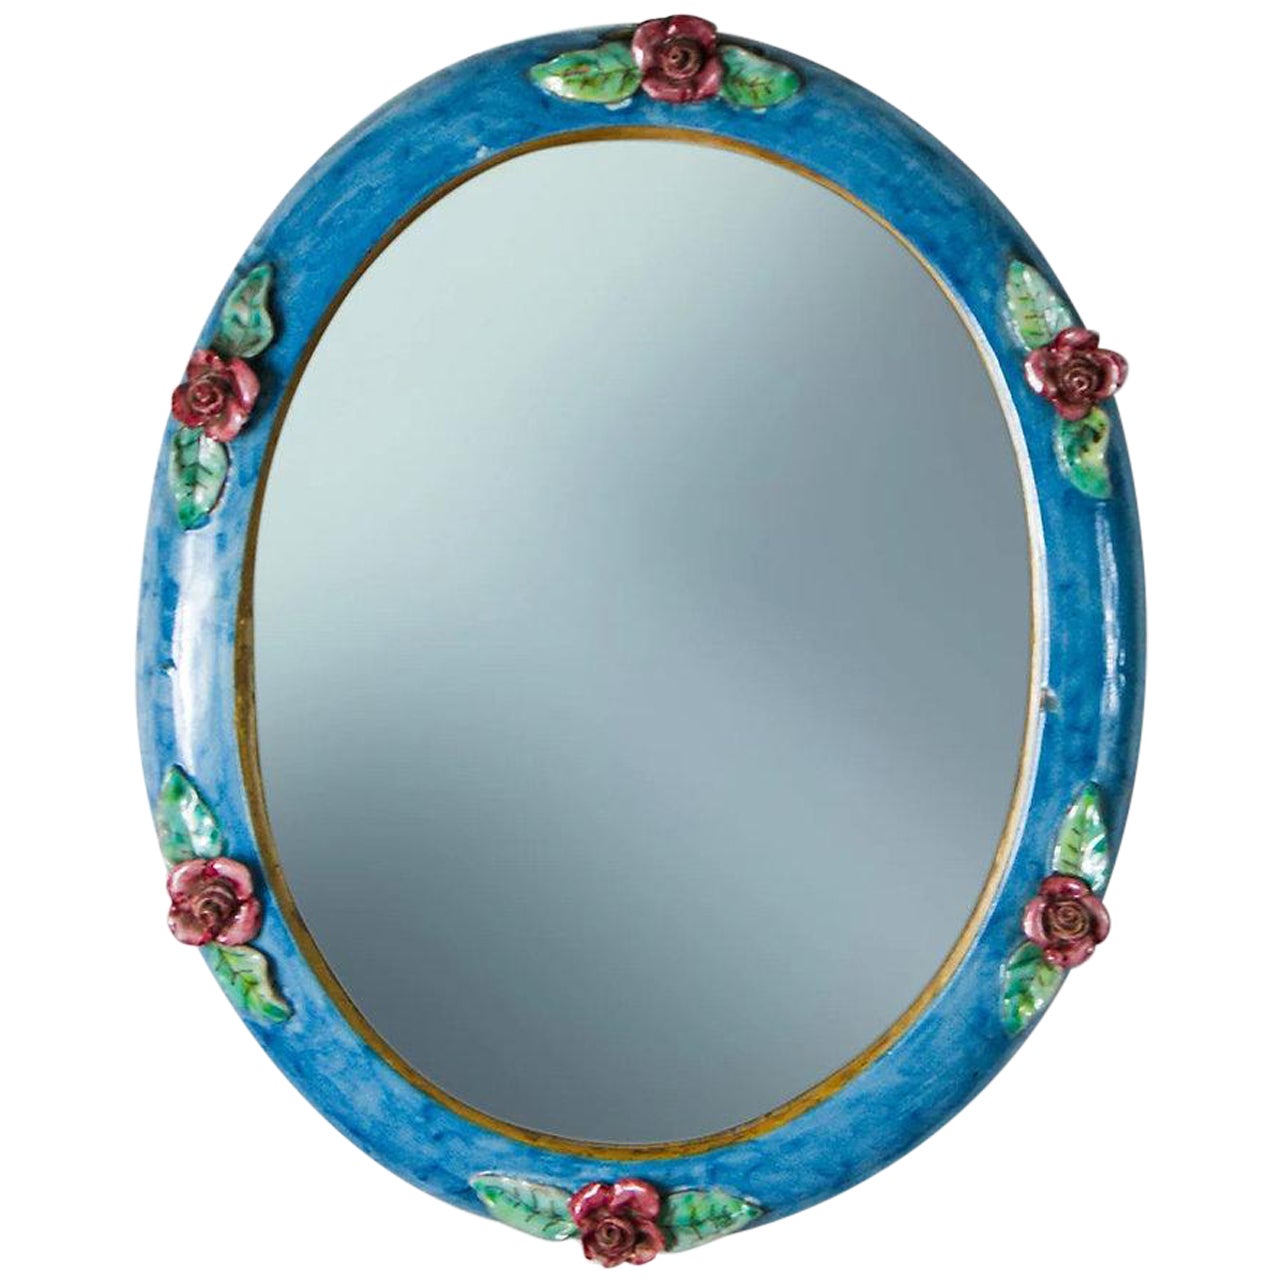 C.A.S Vietri Italy Ceramic Wall Mirror with Flower Applique For Sale